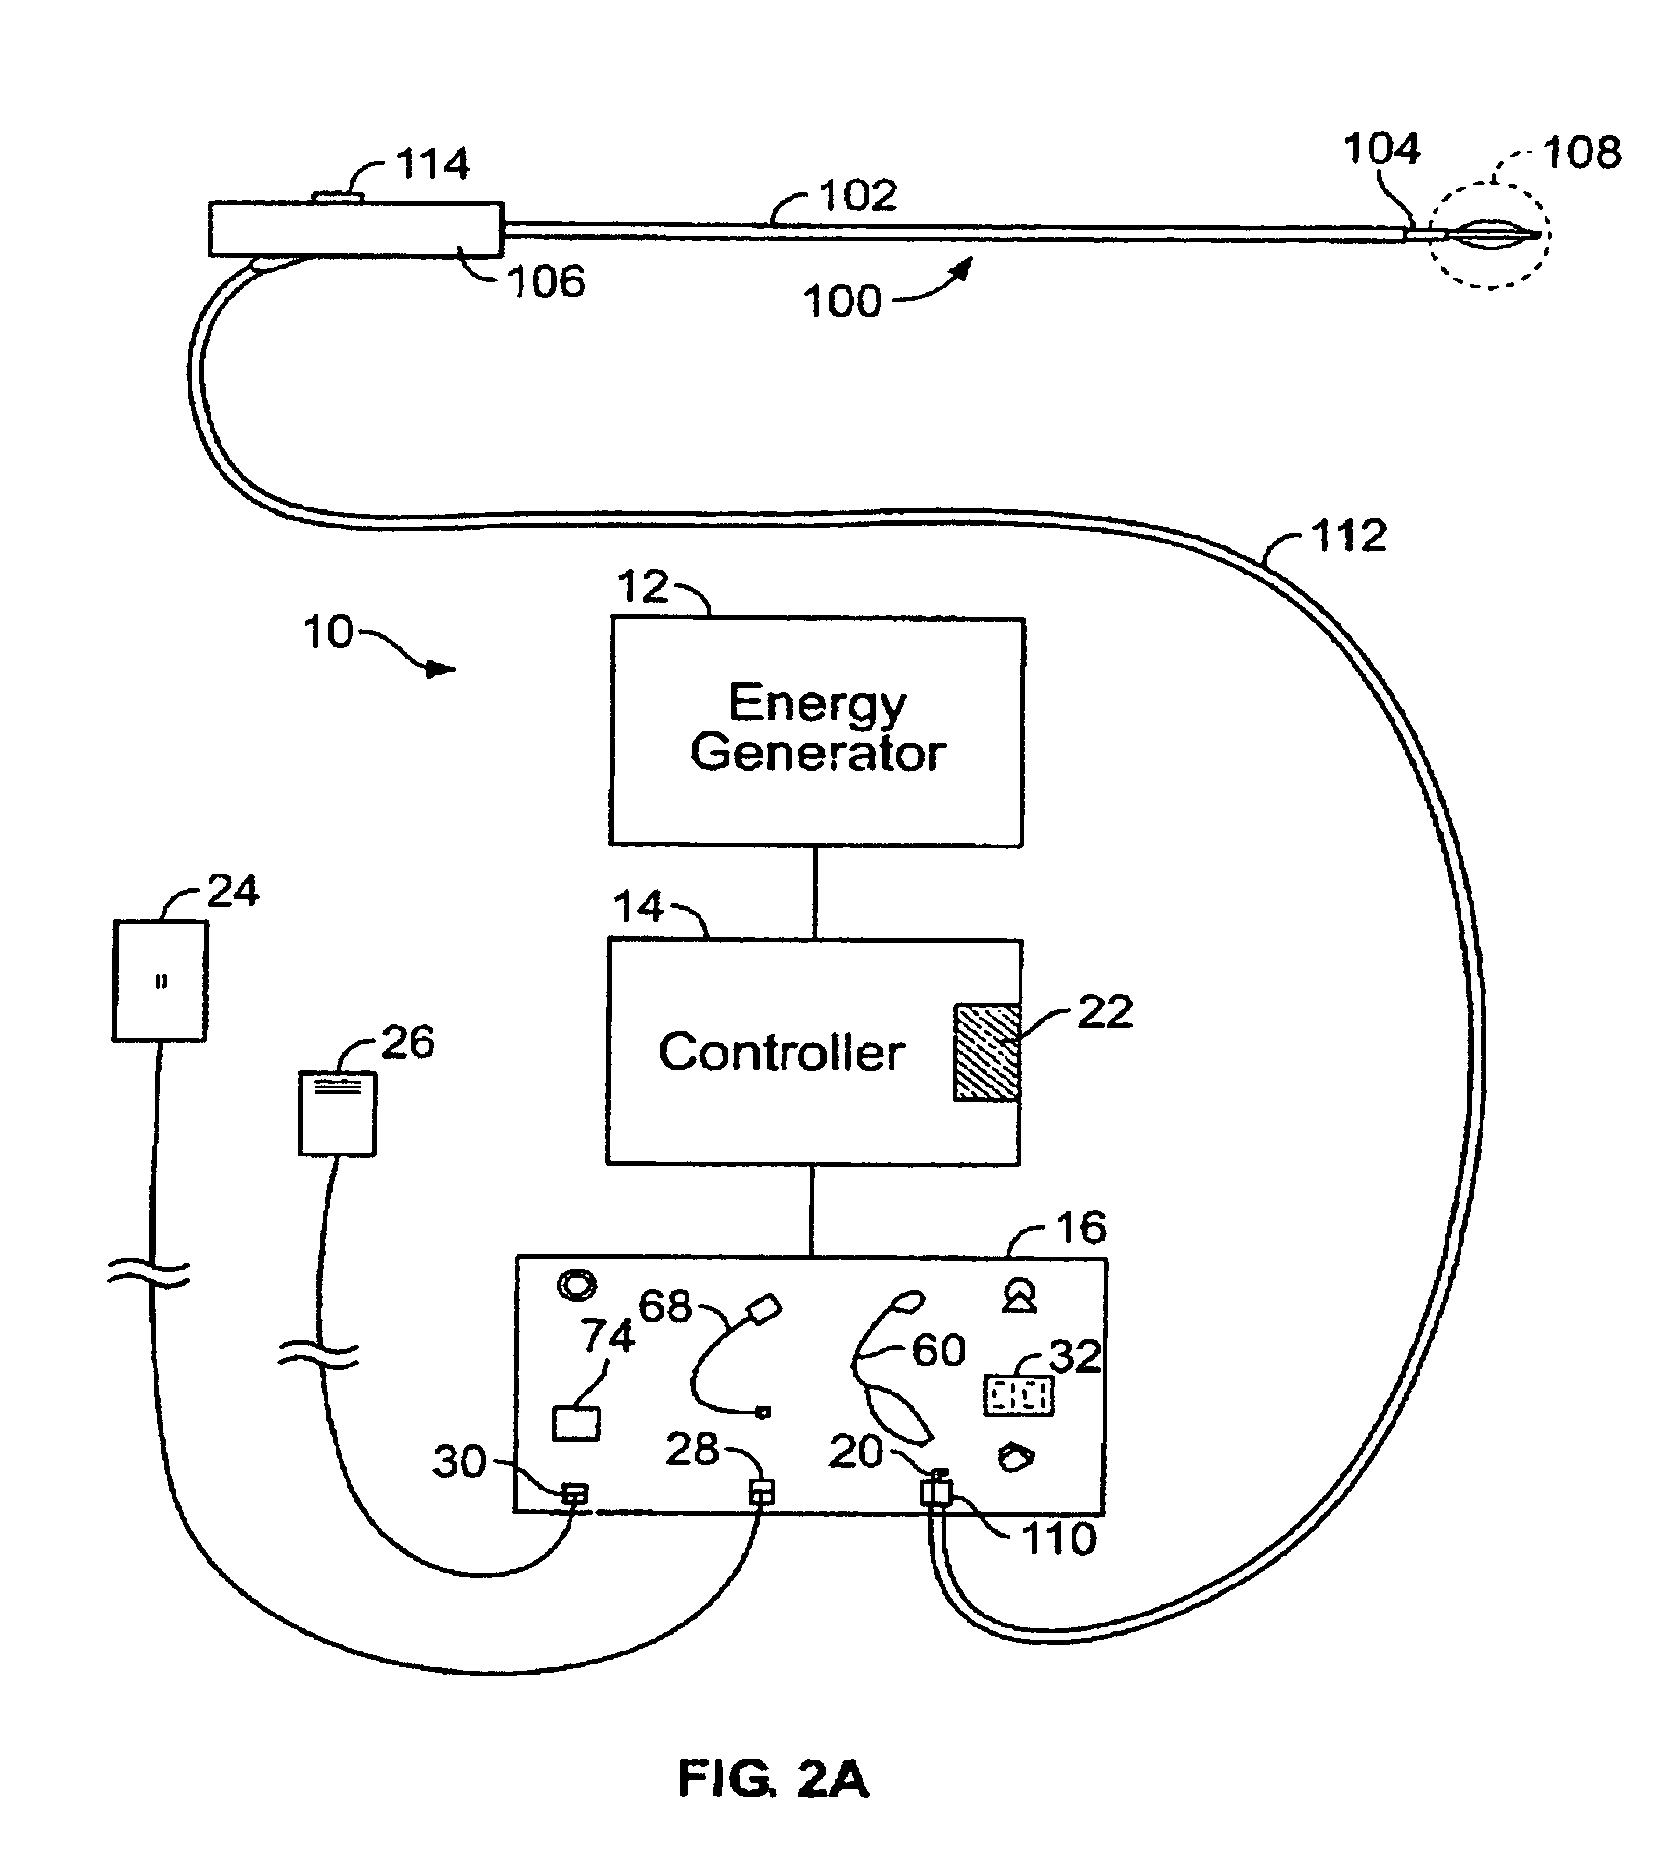 Energy delivery devices and methods